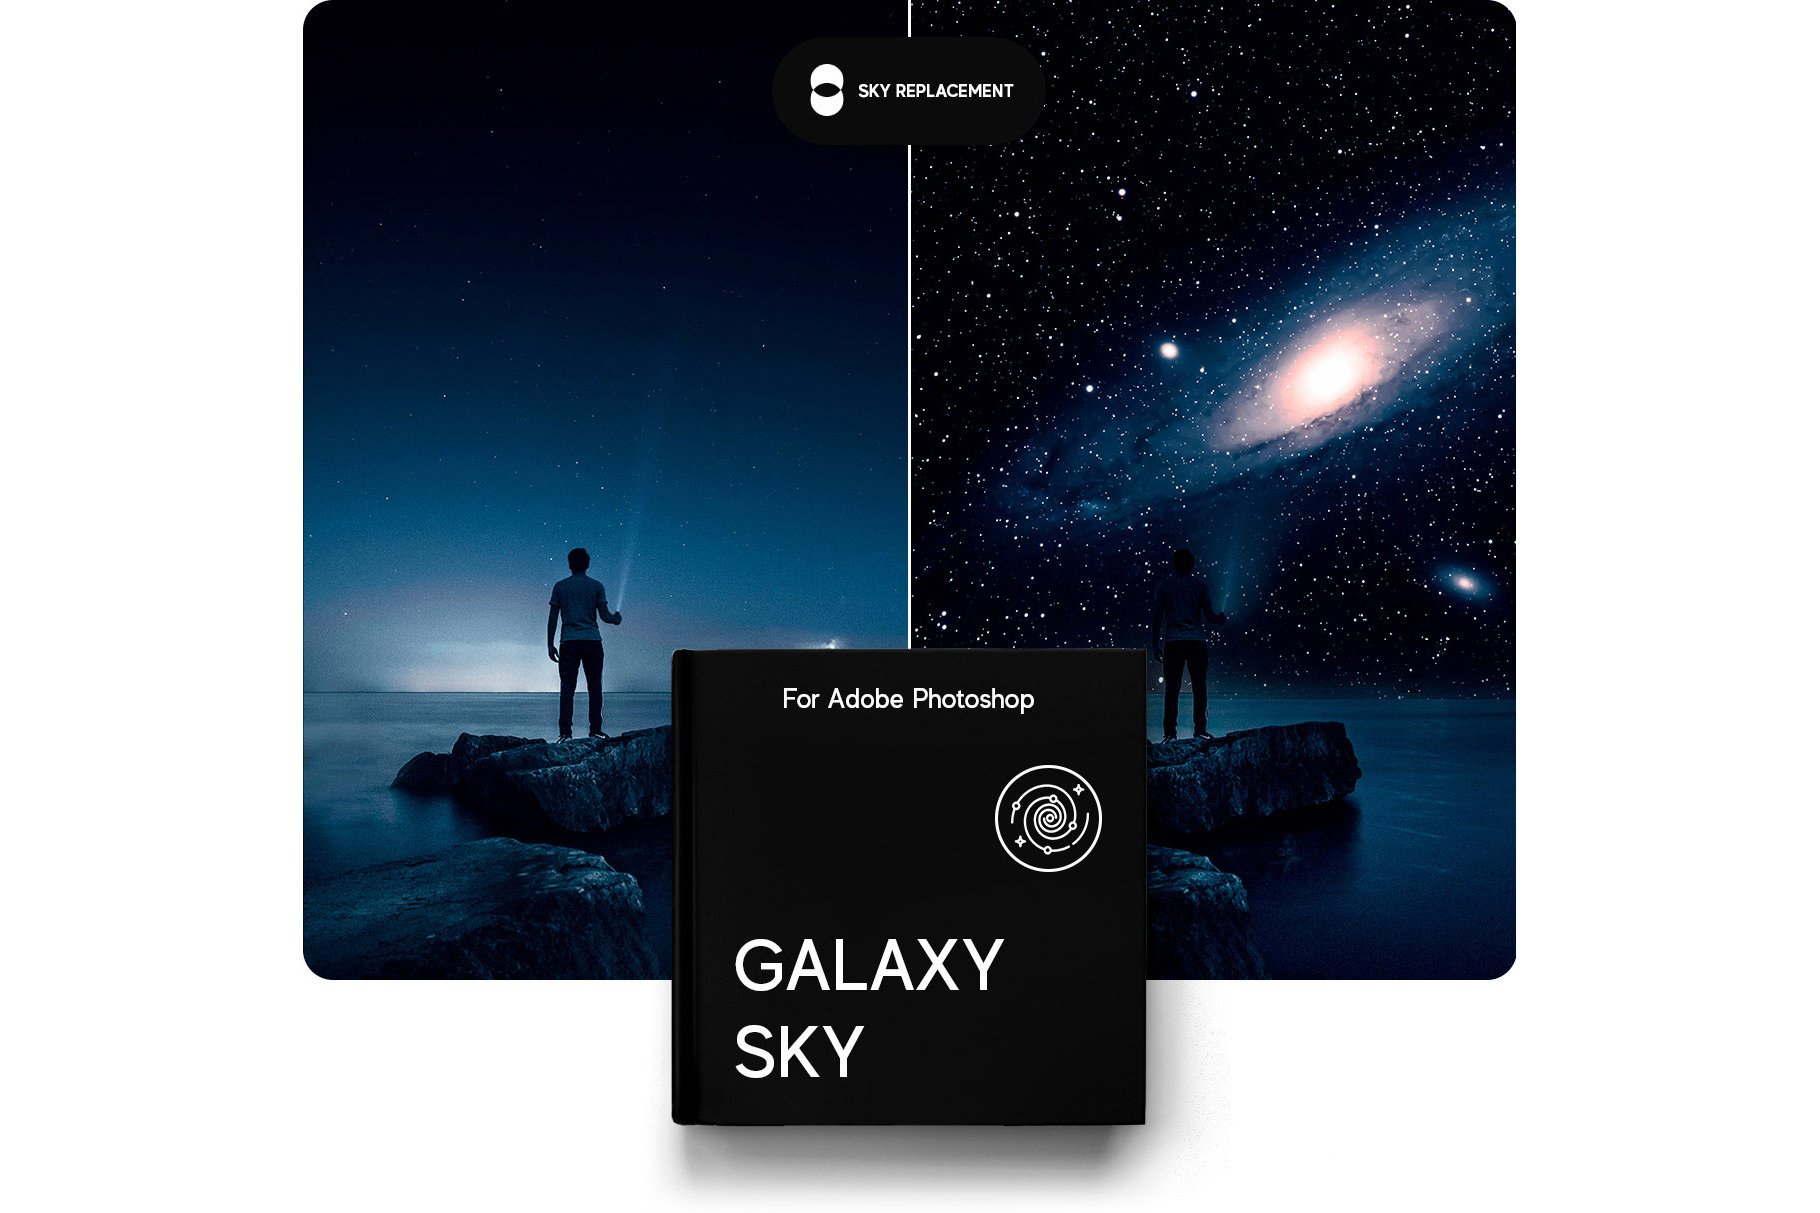 galaxy sky replacement pack for adobe photoshop 1 393